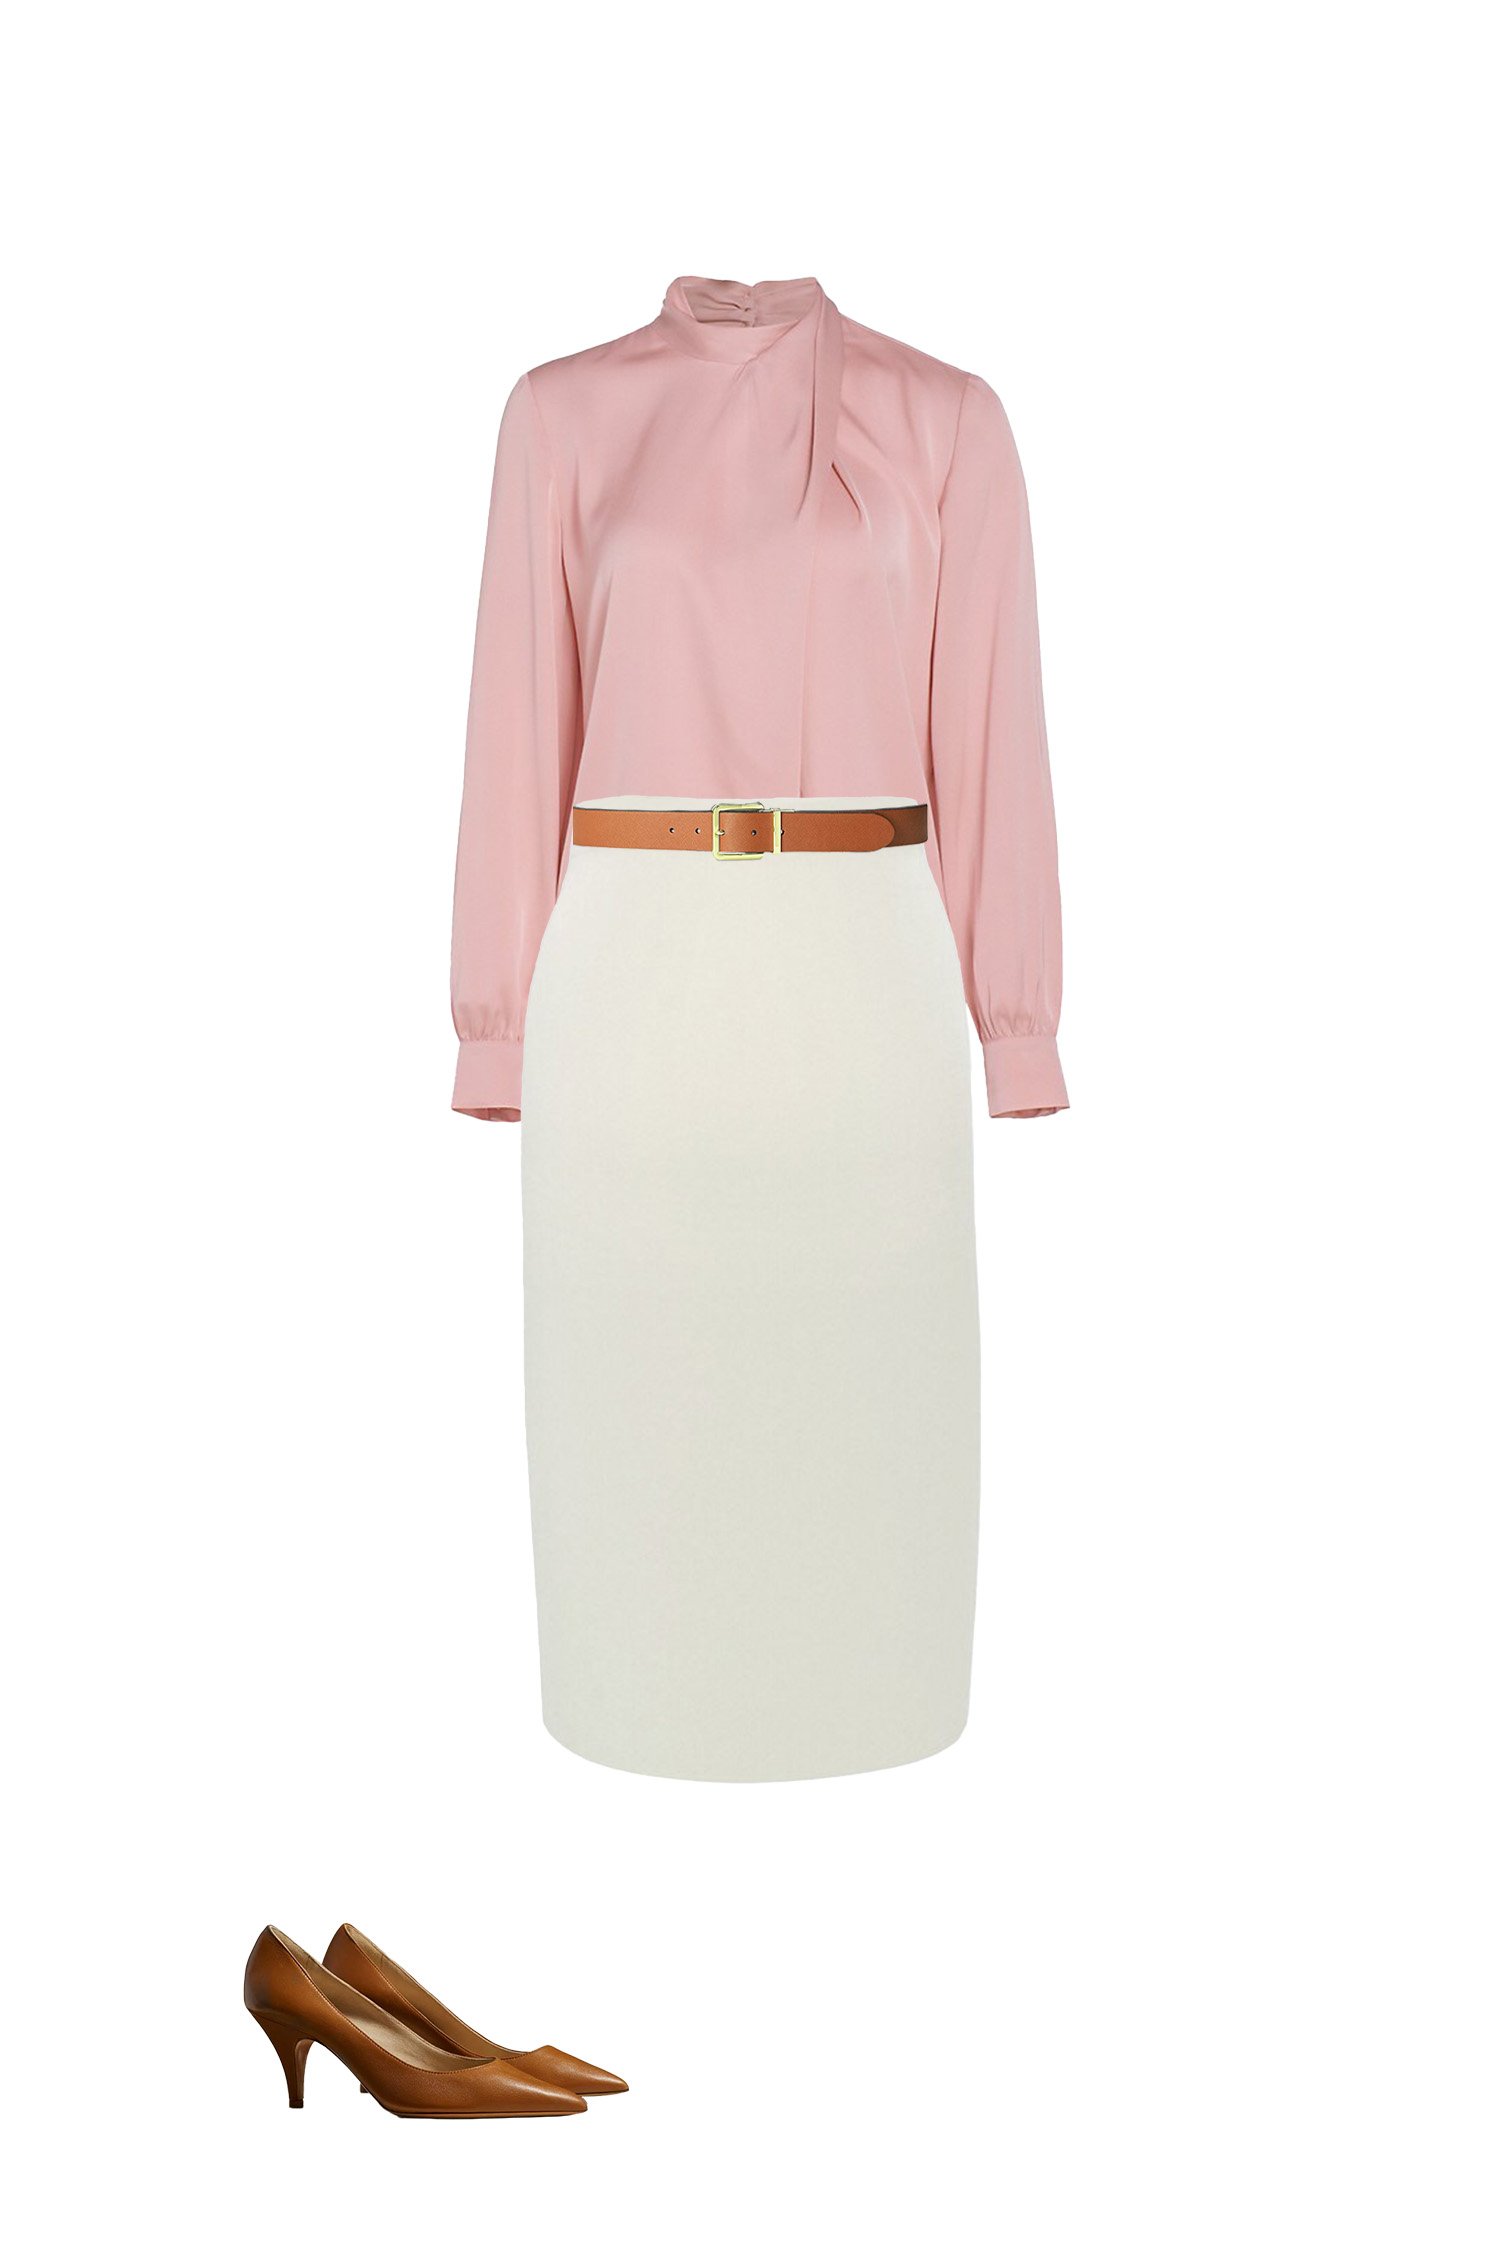 White Pencil Skirt with Pink Satin Blouse with Brown Belt and Brown Pumps